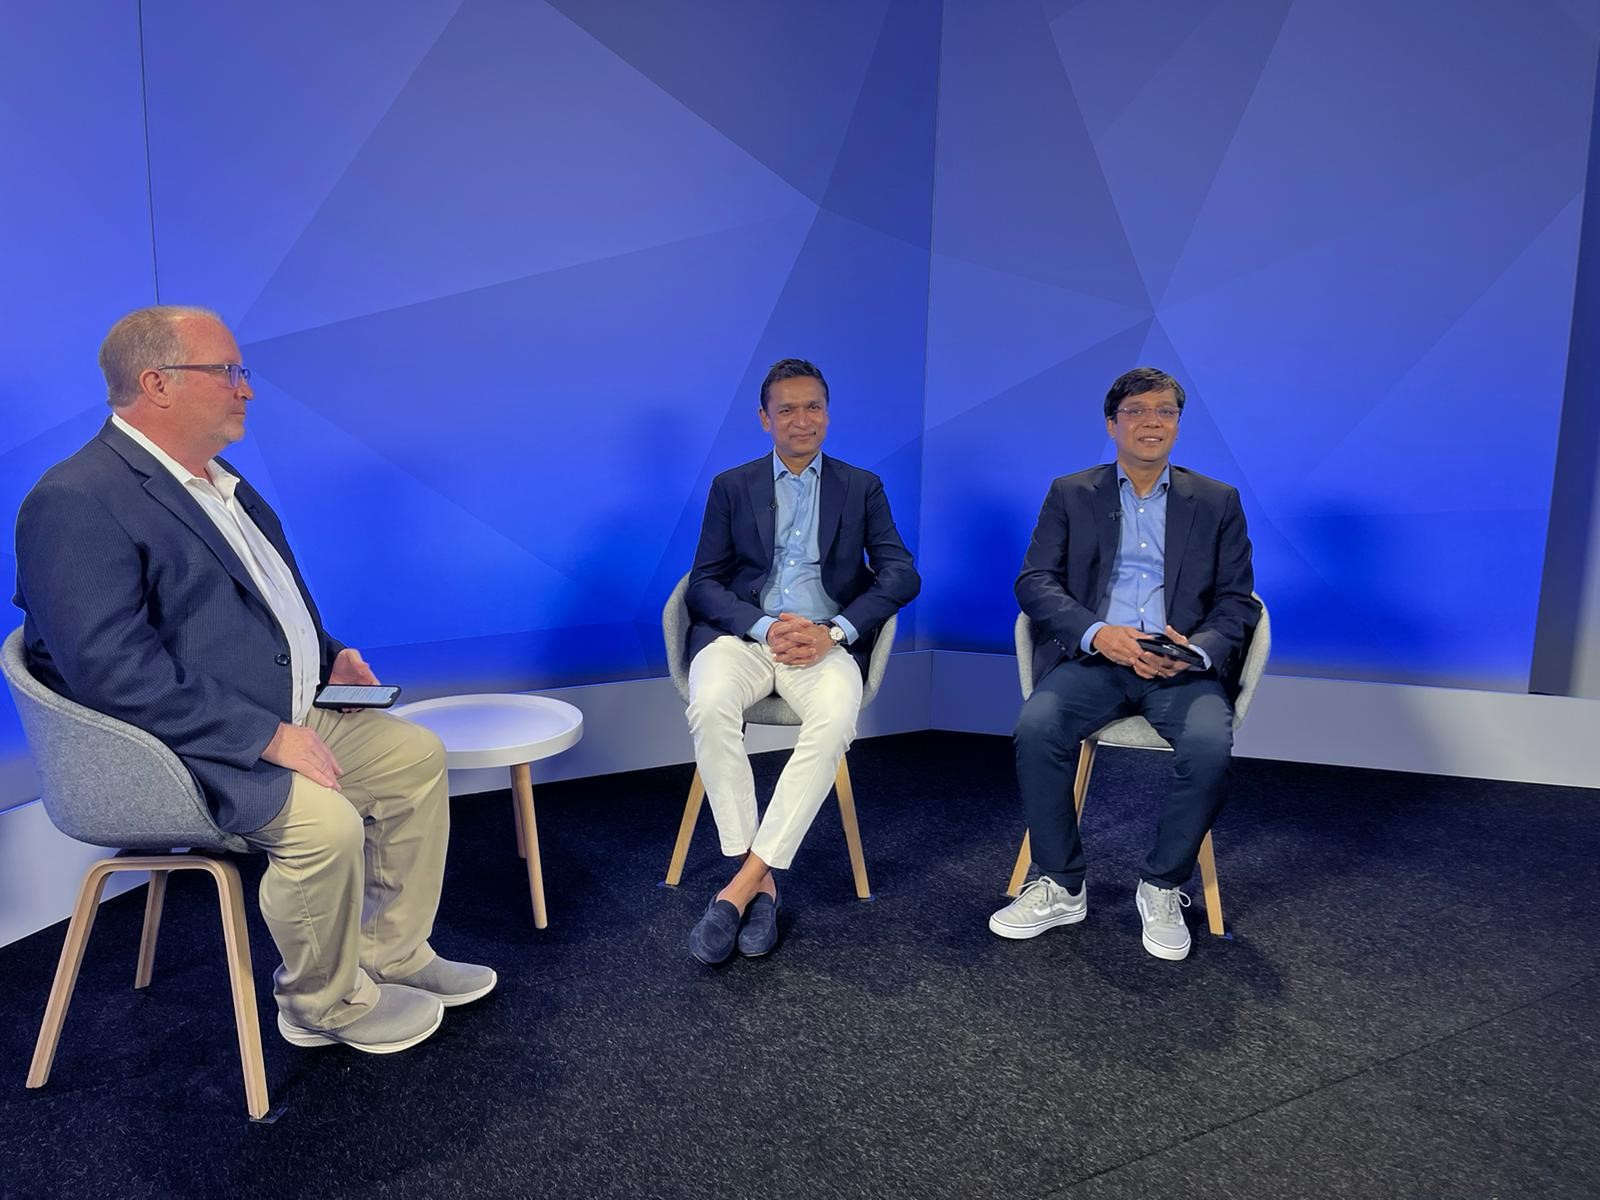 (Middle) Shahid Ahmed, Executive Vice President, New Ventures and Innovation for NTT Ltd. and (Right) Masum Mir, SVP and GM Cisco Networking, Provider Mobility discuss challenges of private 5G network deployments, and whether the industry is starting to see real world deployments at MWC Barcelona 2023